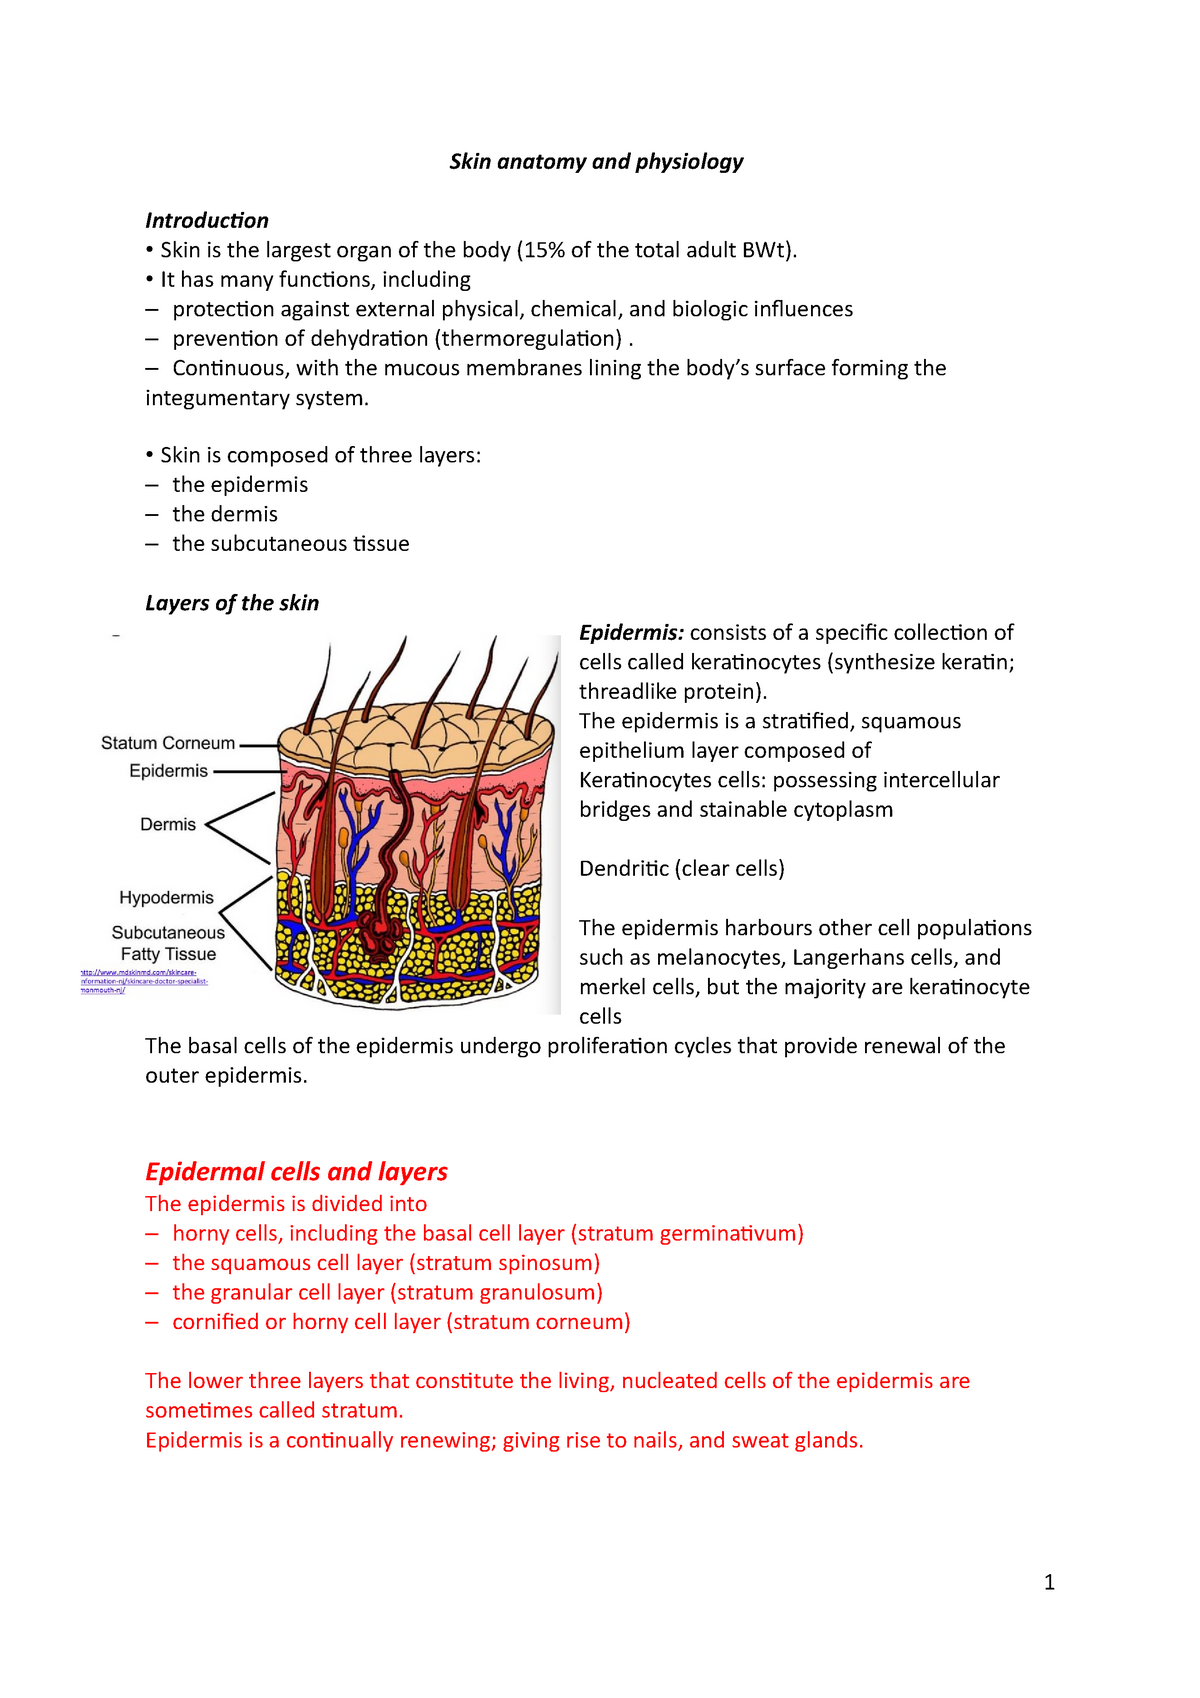 Skin Anatomy And Physiology Skin Anatomy And Physiology Introduction